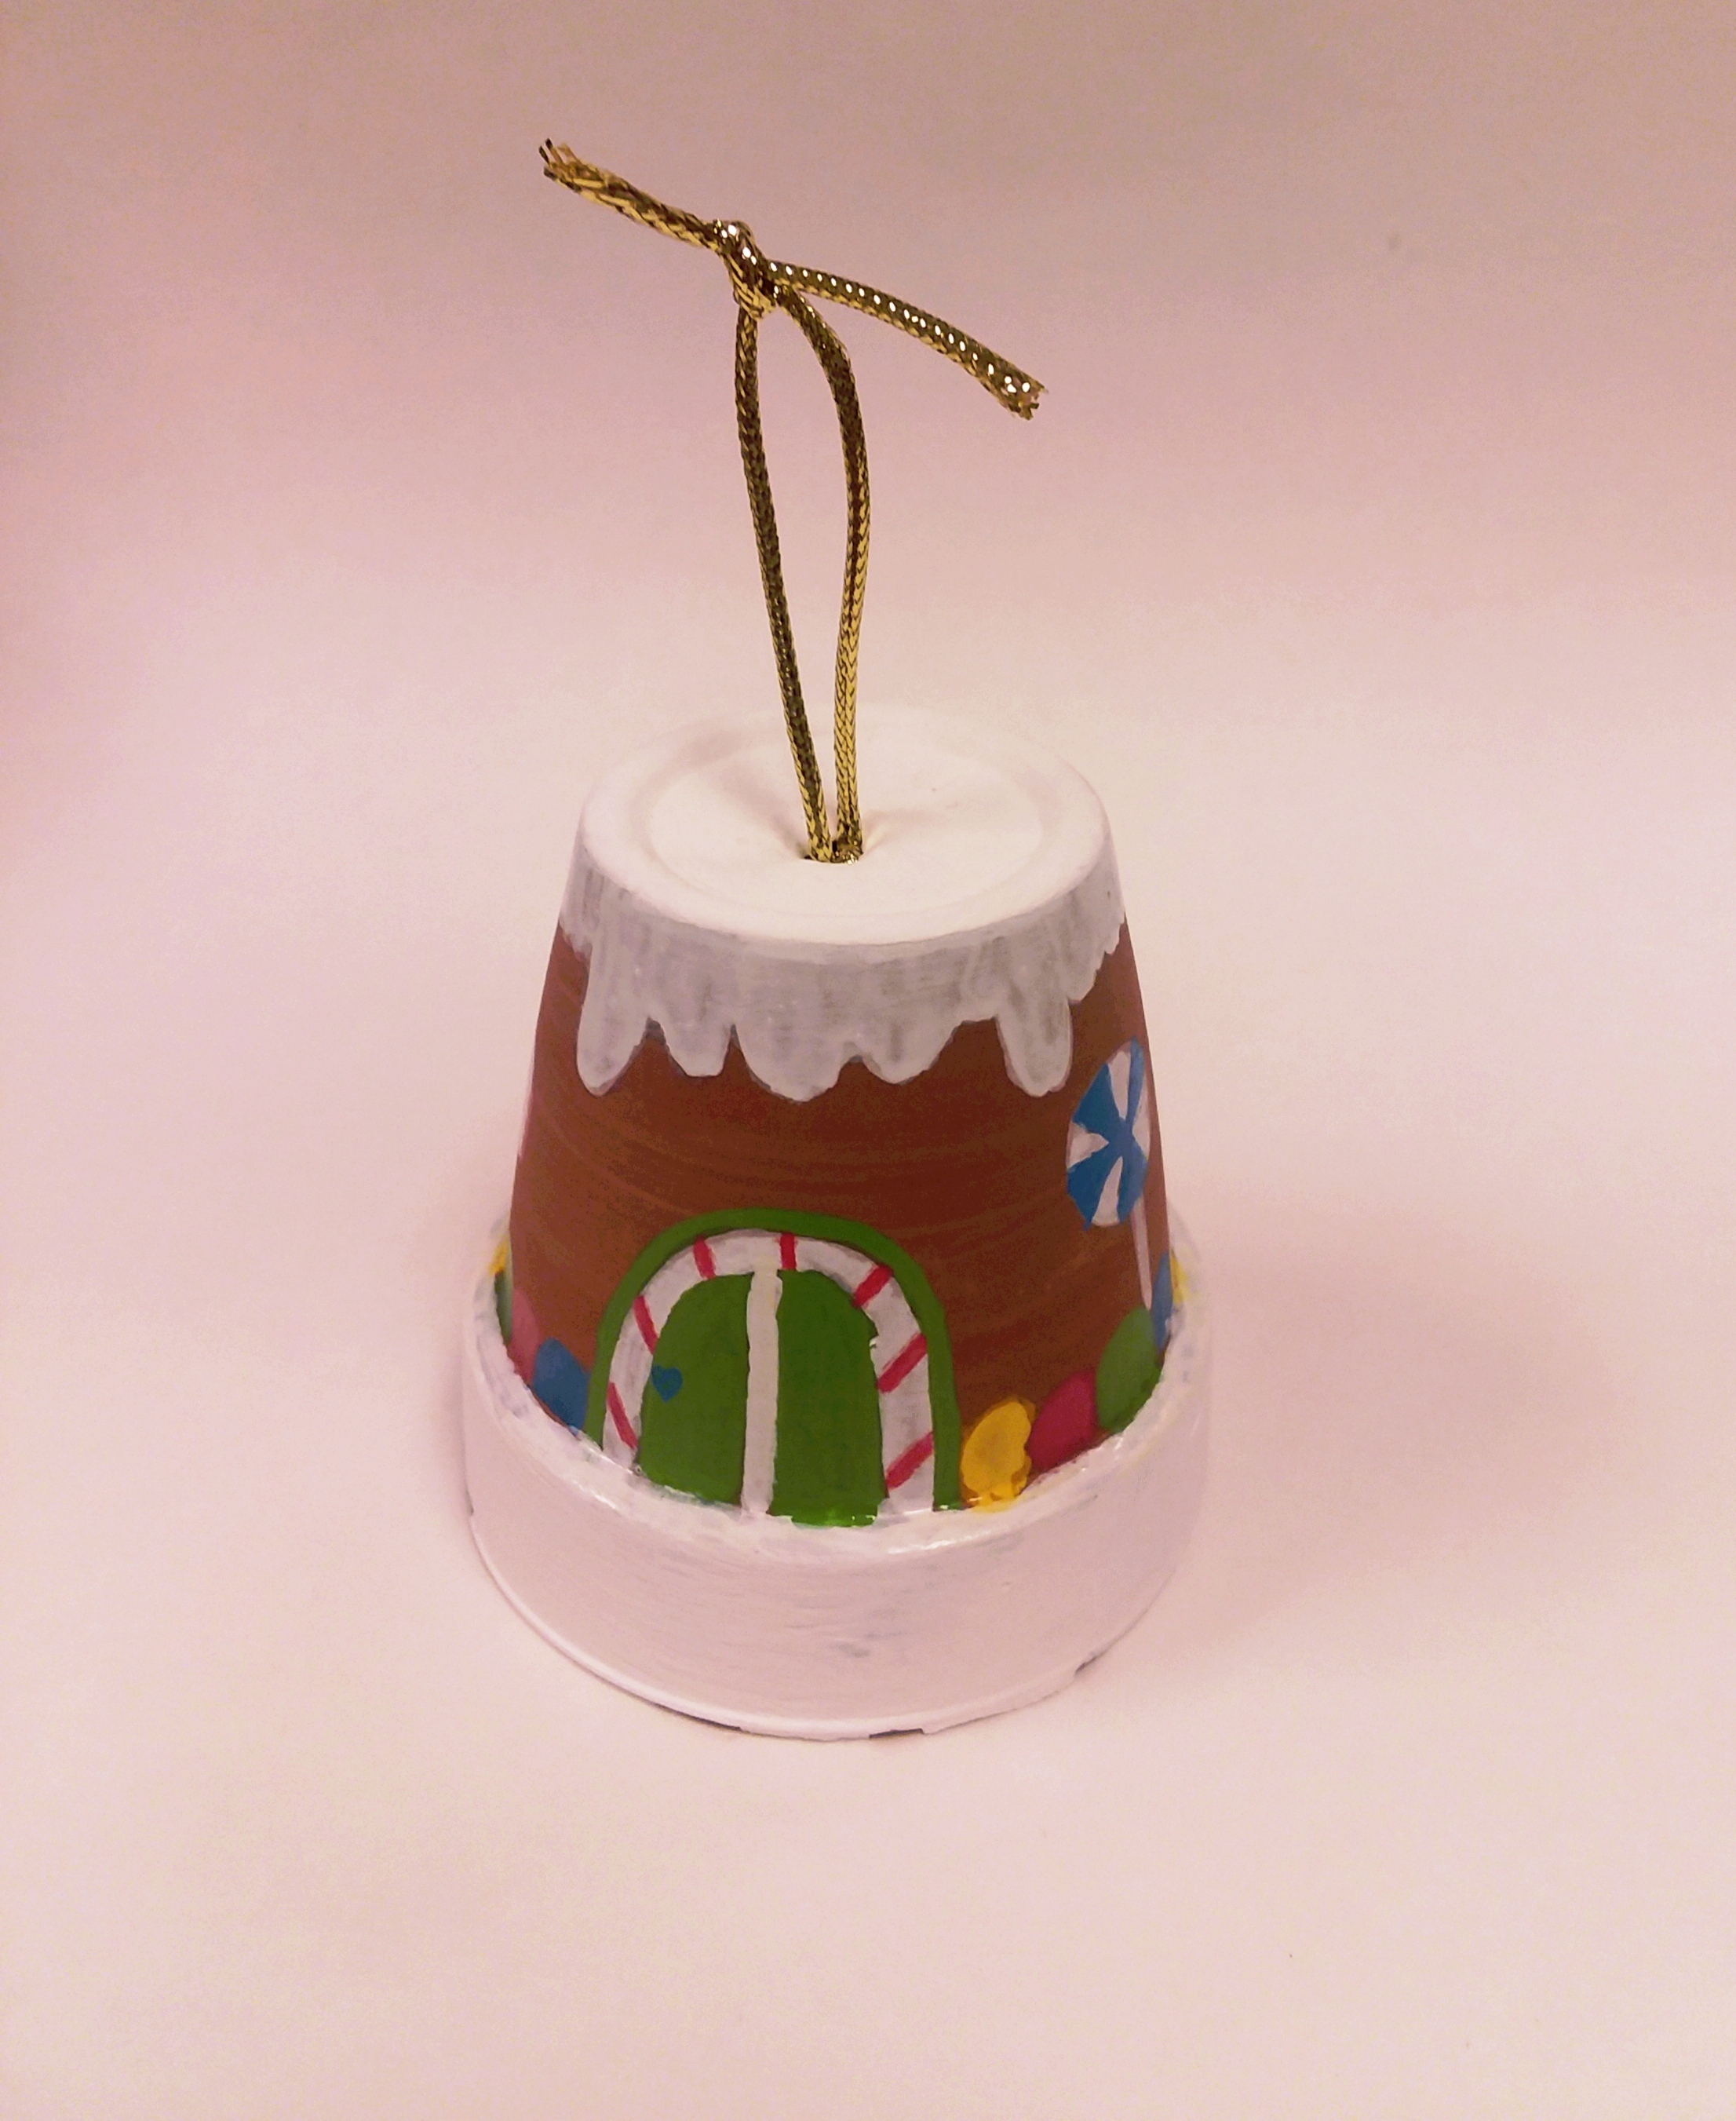 ornament made out of painted and decorated mini terra cotta planter